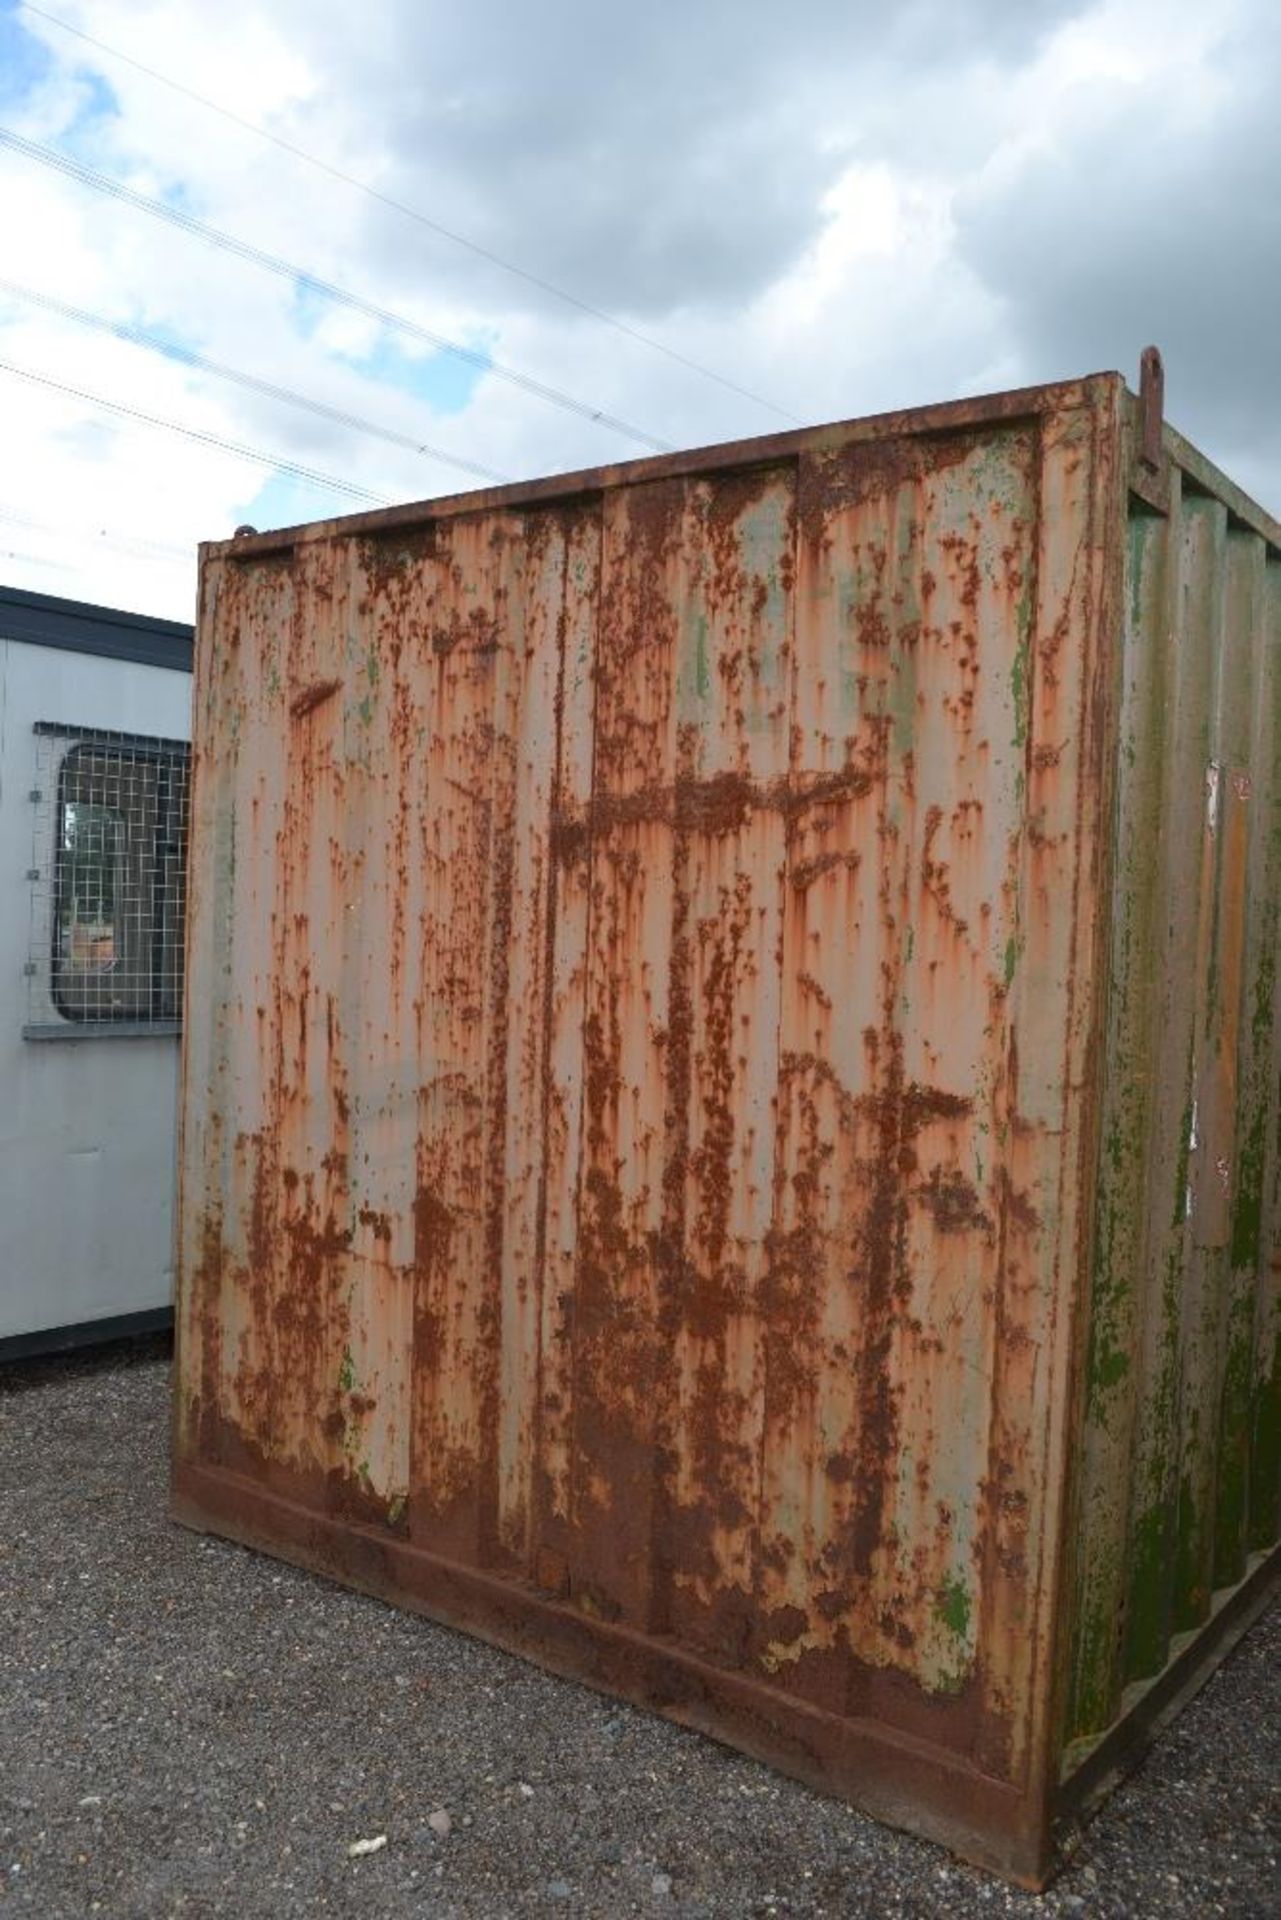 12ft x 8ft container. Loose contents not included. - Image 4 of 11